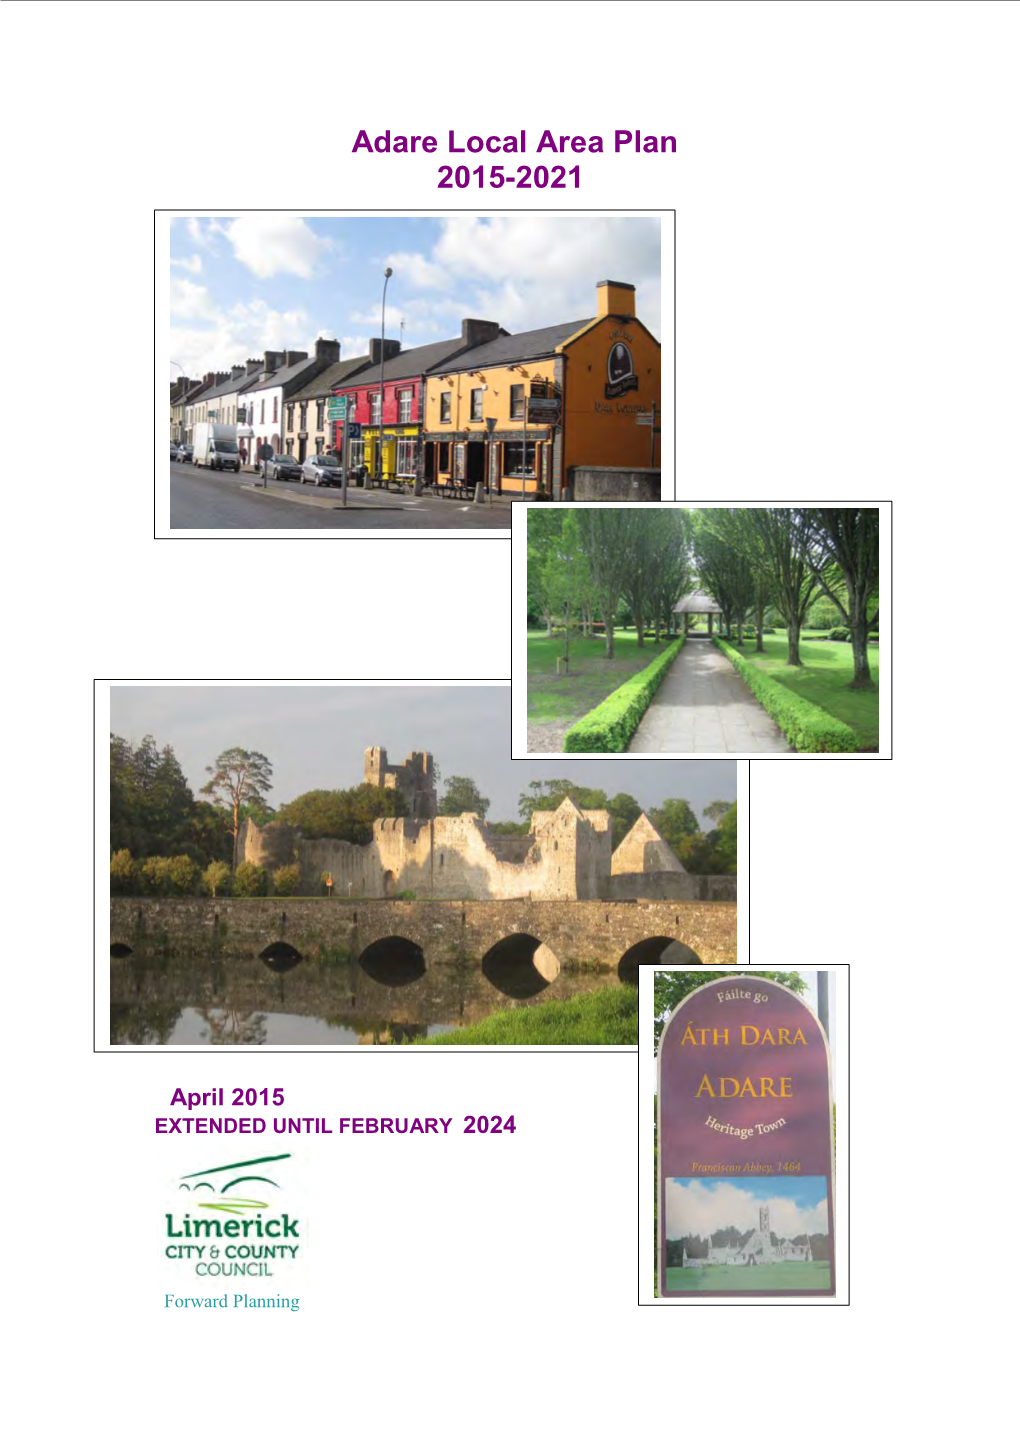 Extended Adare Local Area Plan